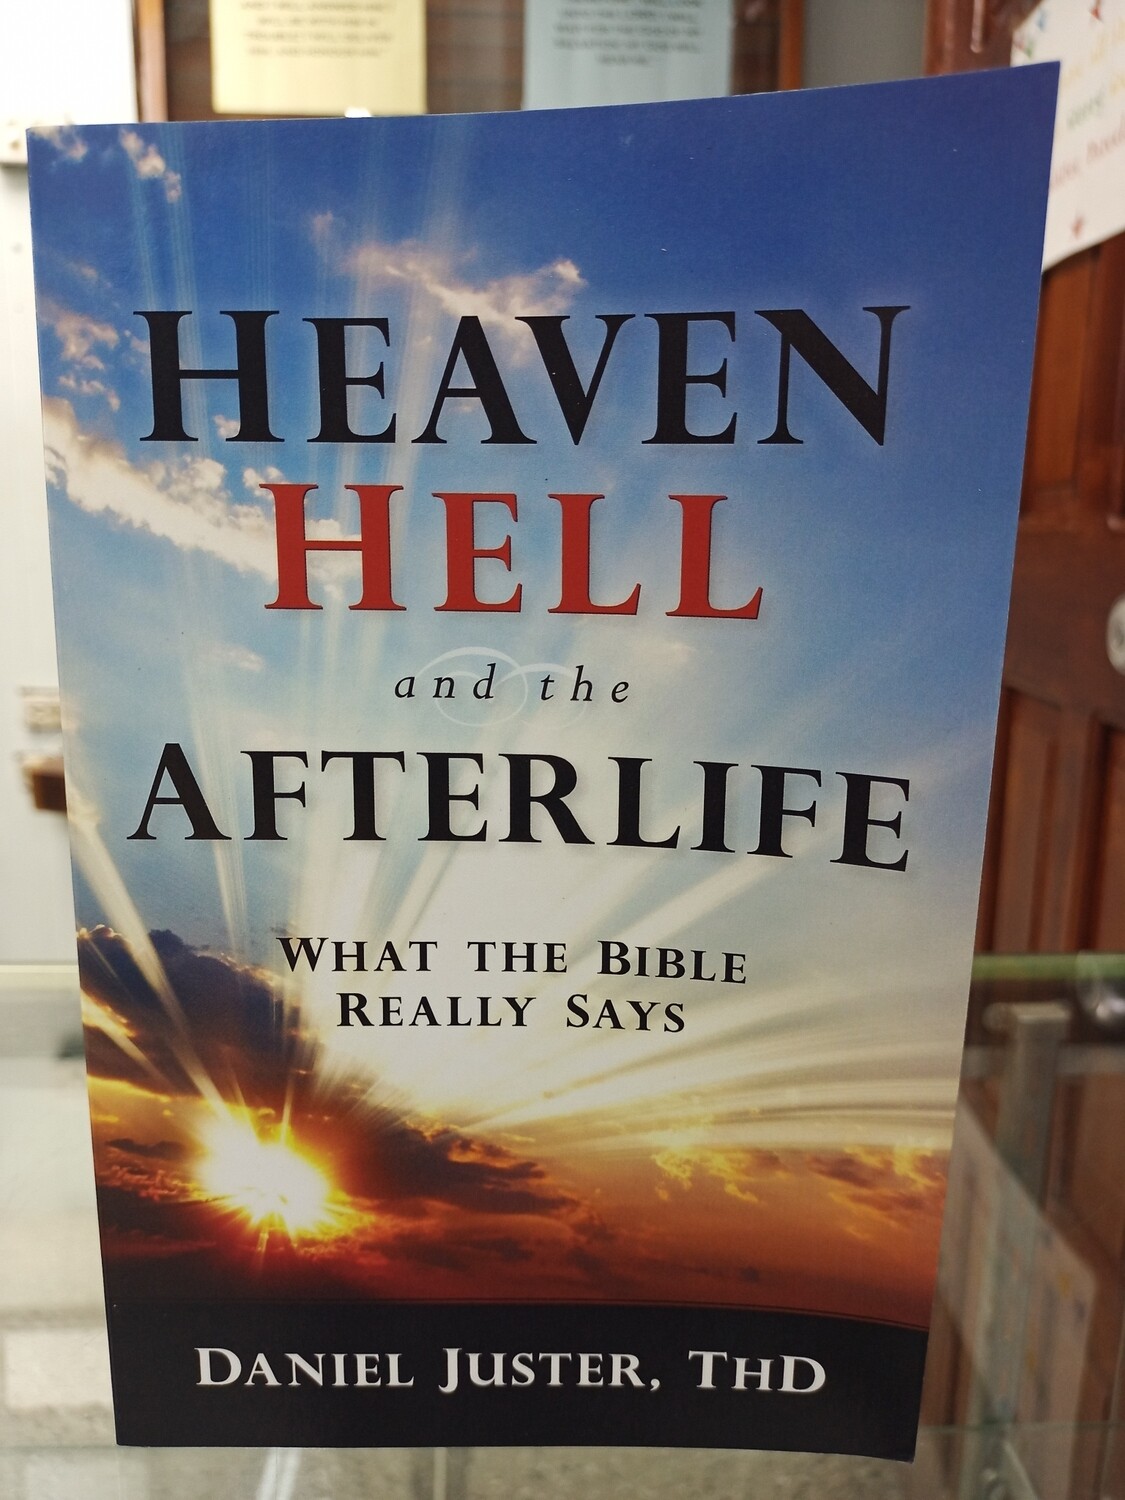 Heaven, hell and the Afterlife